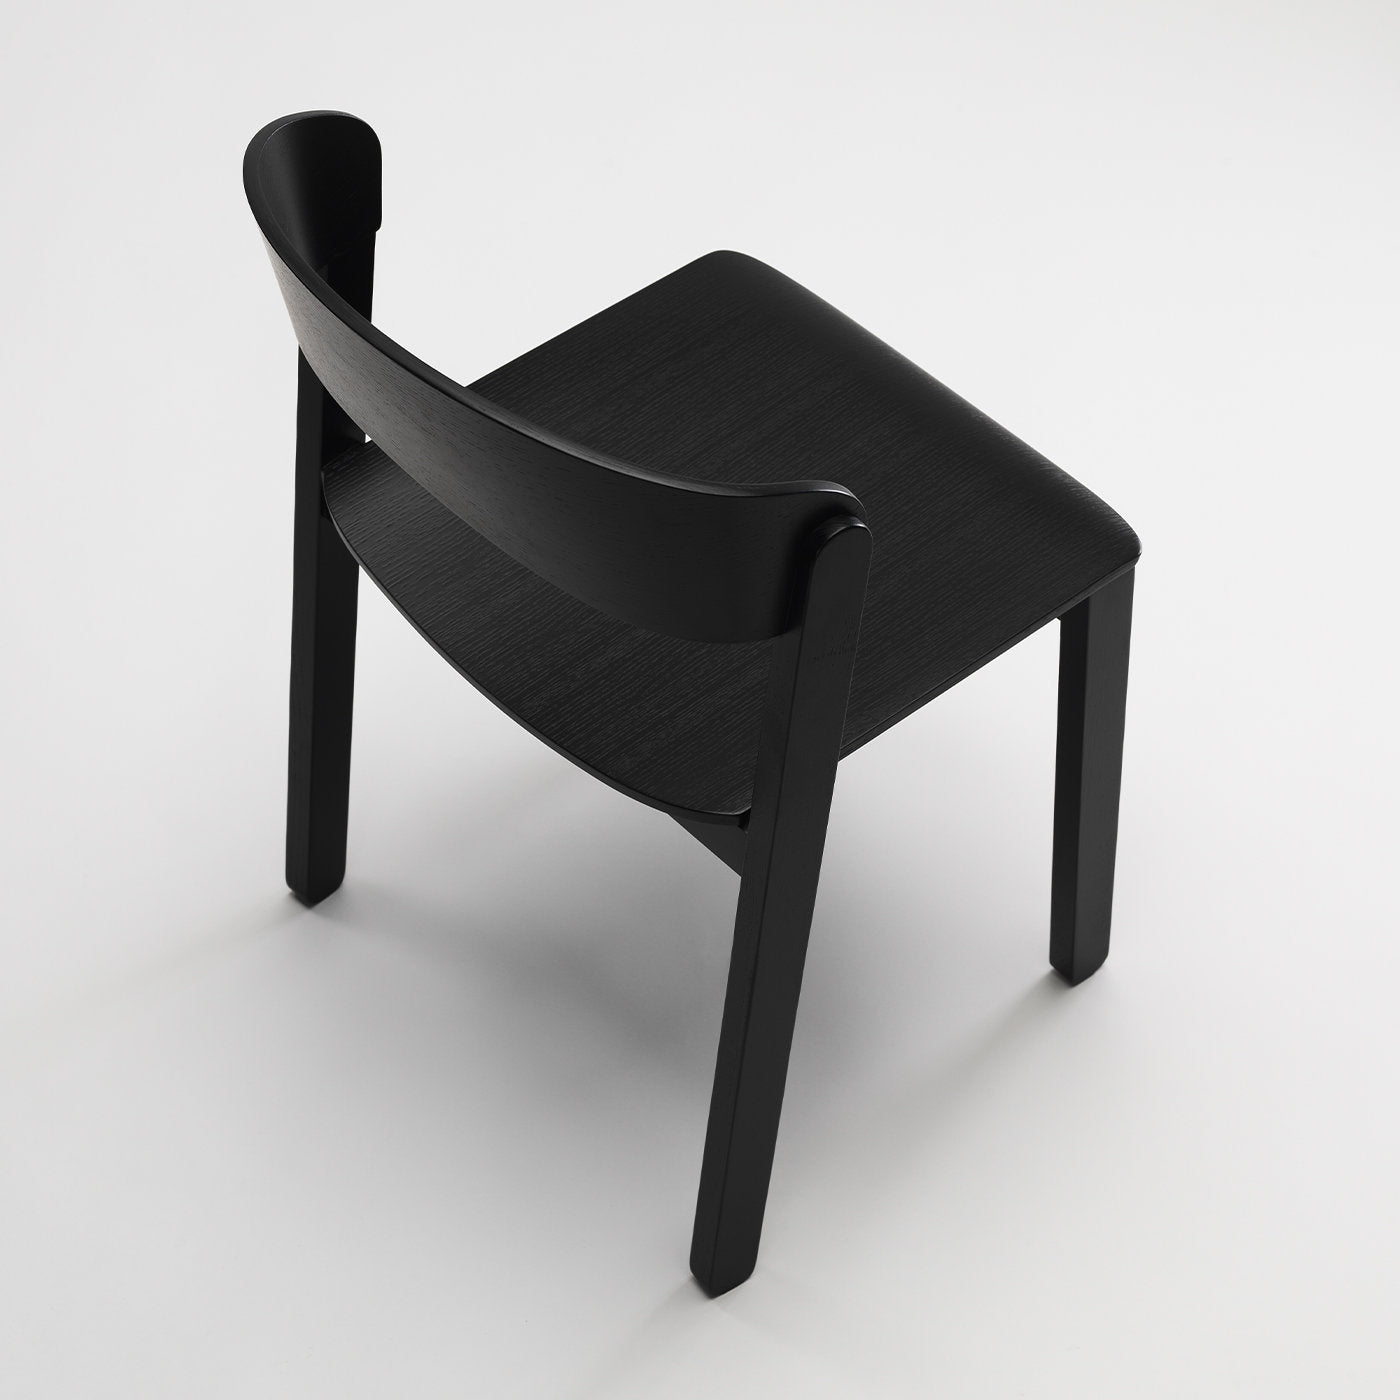 Set of 2 Pur Chairs by Note Design Studio - Alternative view 1